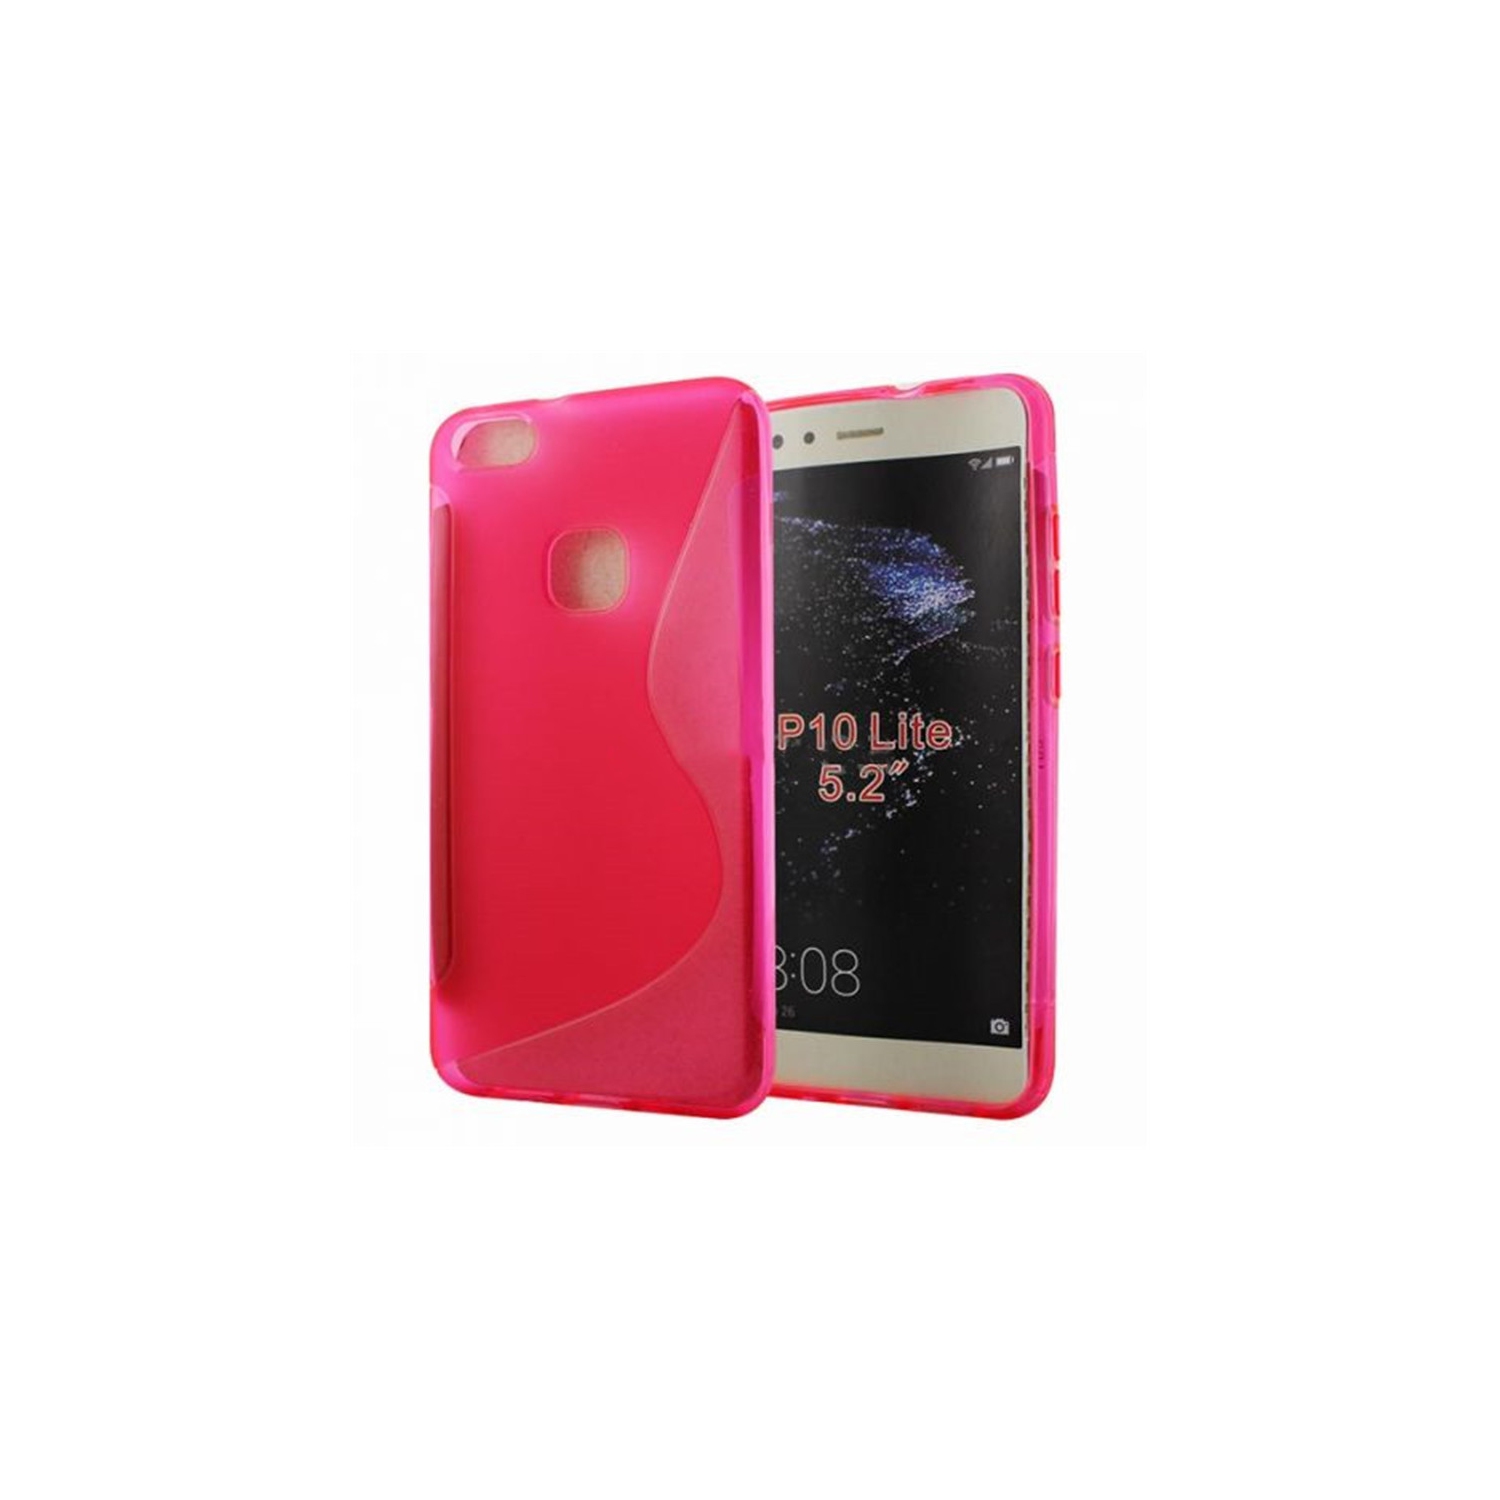 【CSmart】 Ultra Thin Soft TPU Silicone Jelly Bumper Back Cover Case for Huawei P10 Lite, Hot Pink